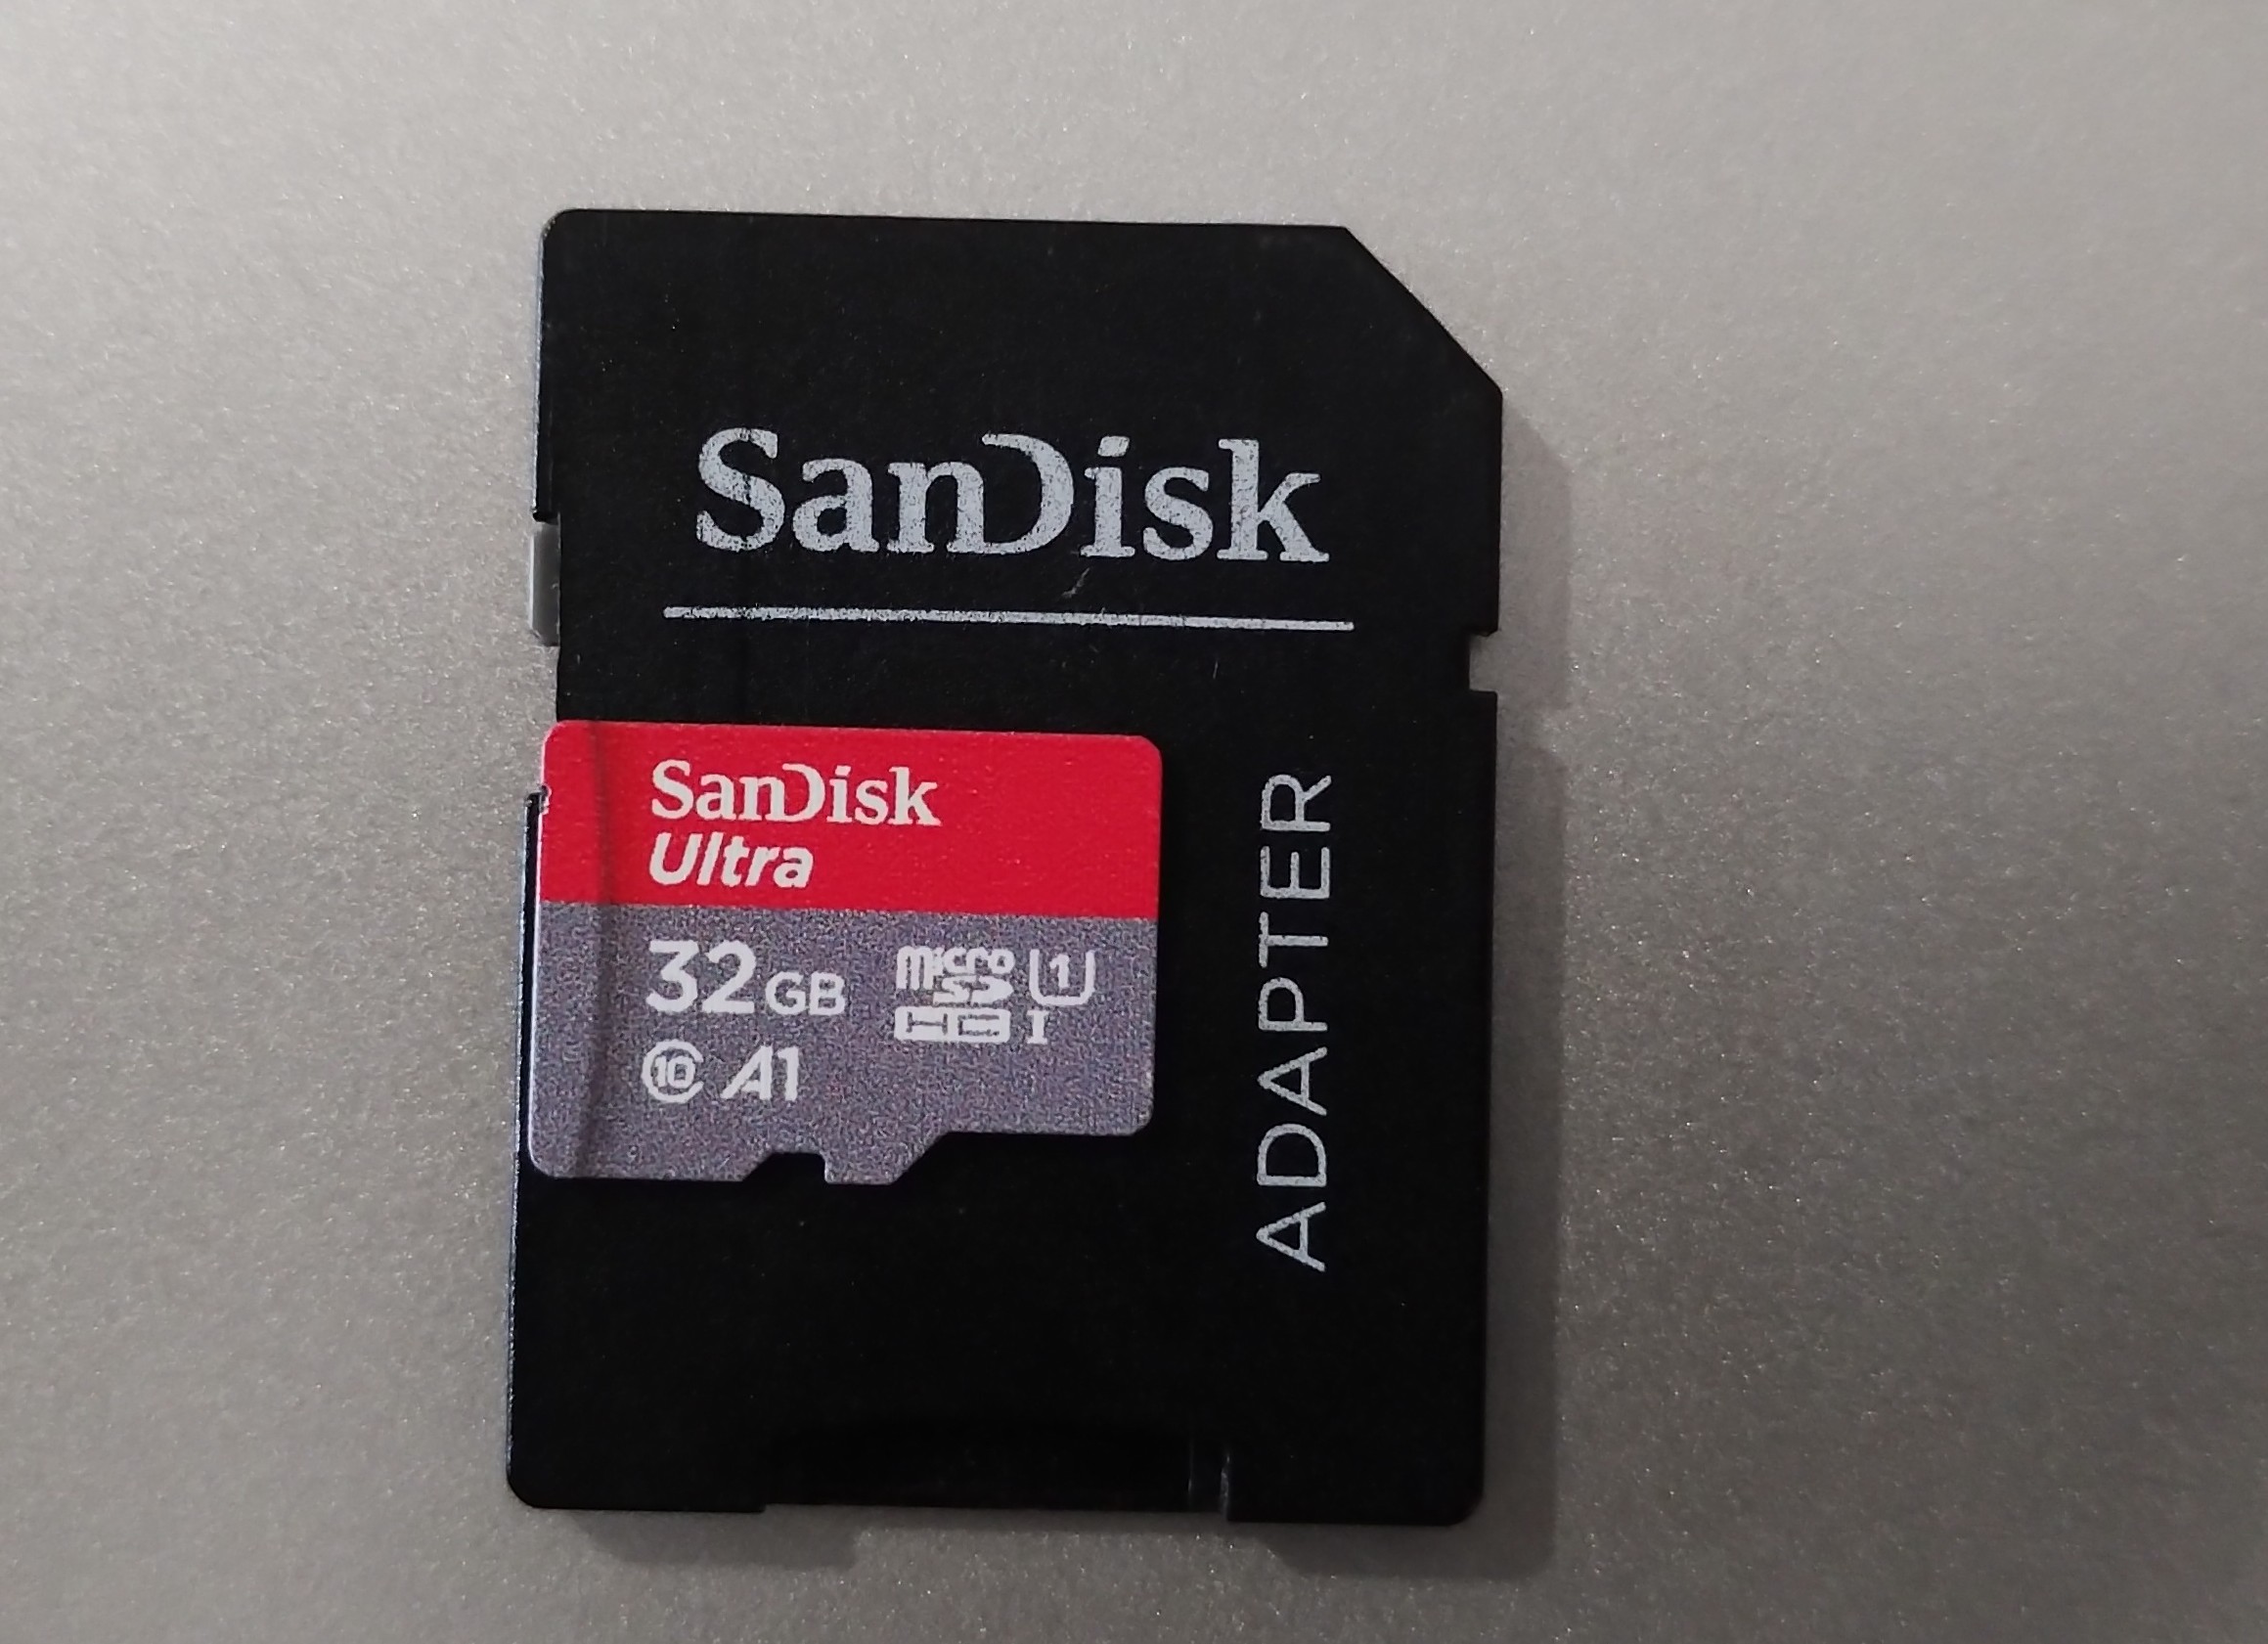 select the sandisk sd card to recover data from